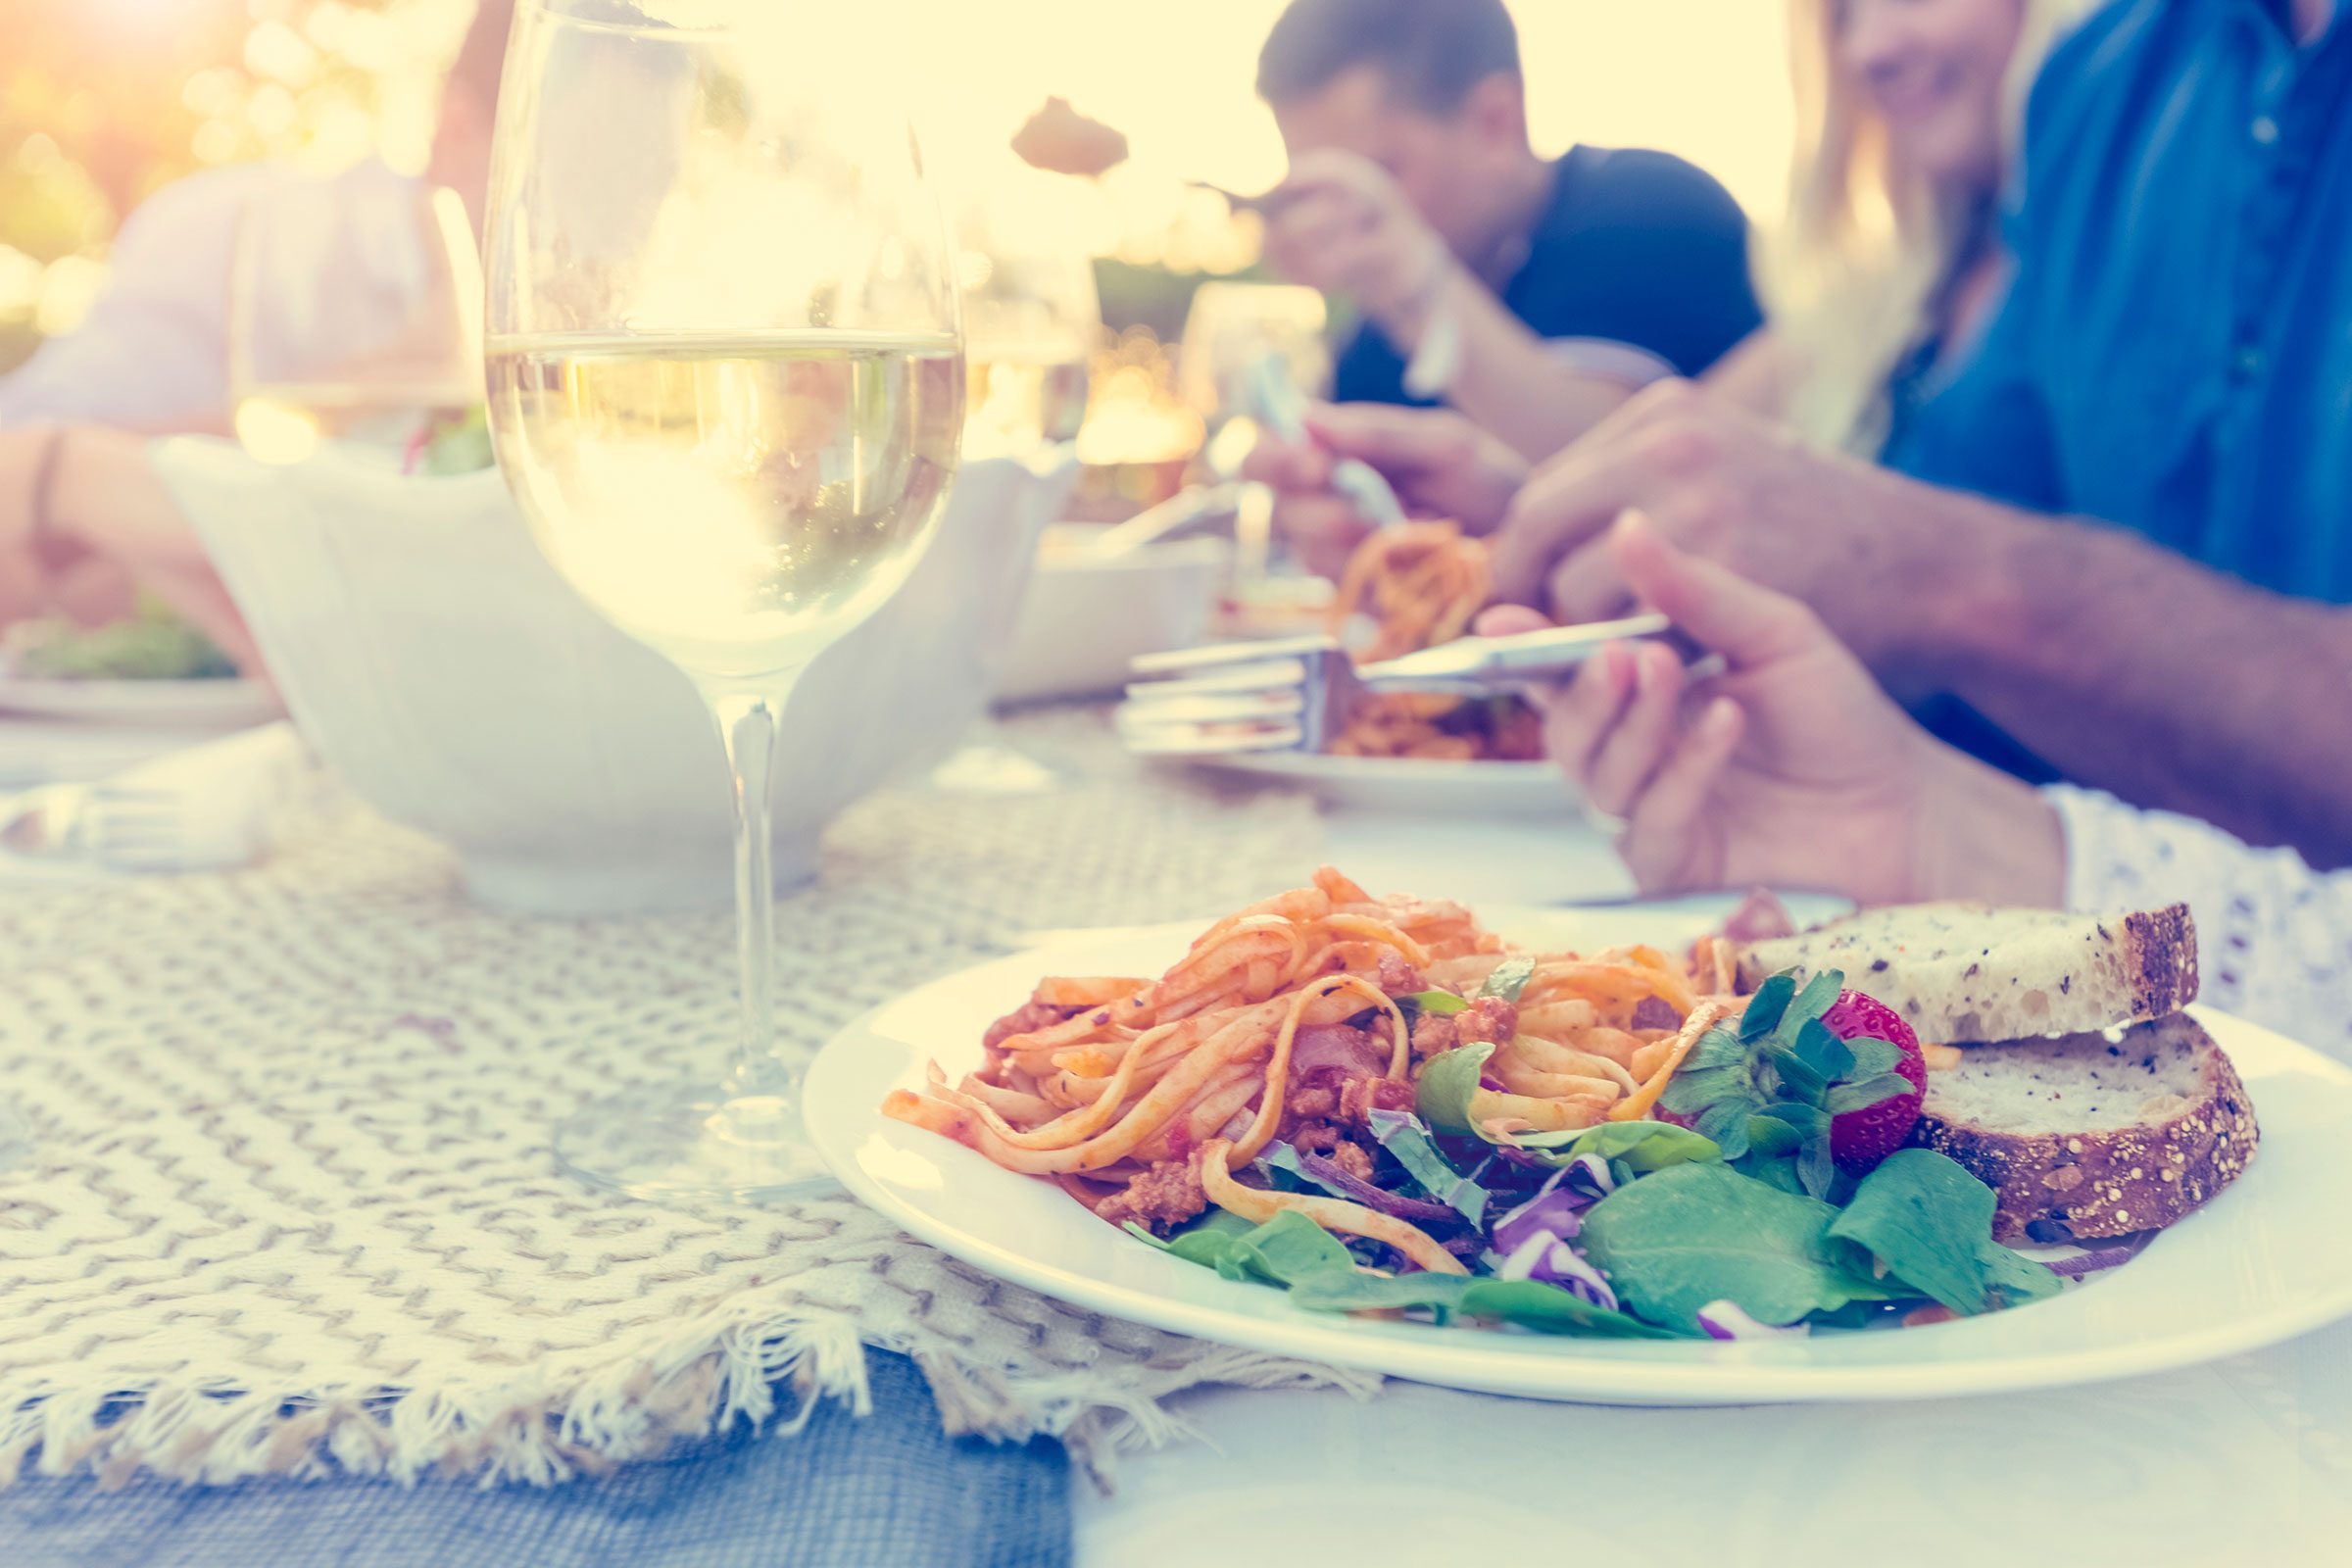 people eating salad with bread and glass of wine